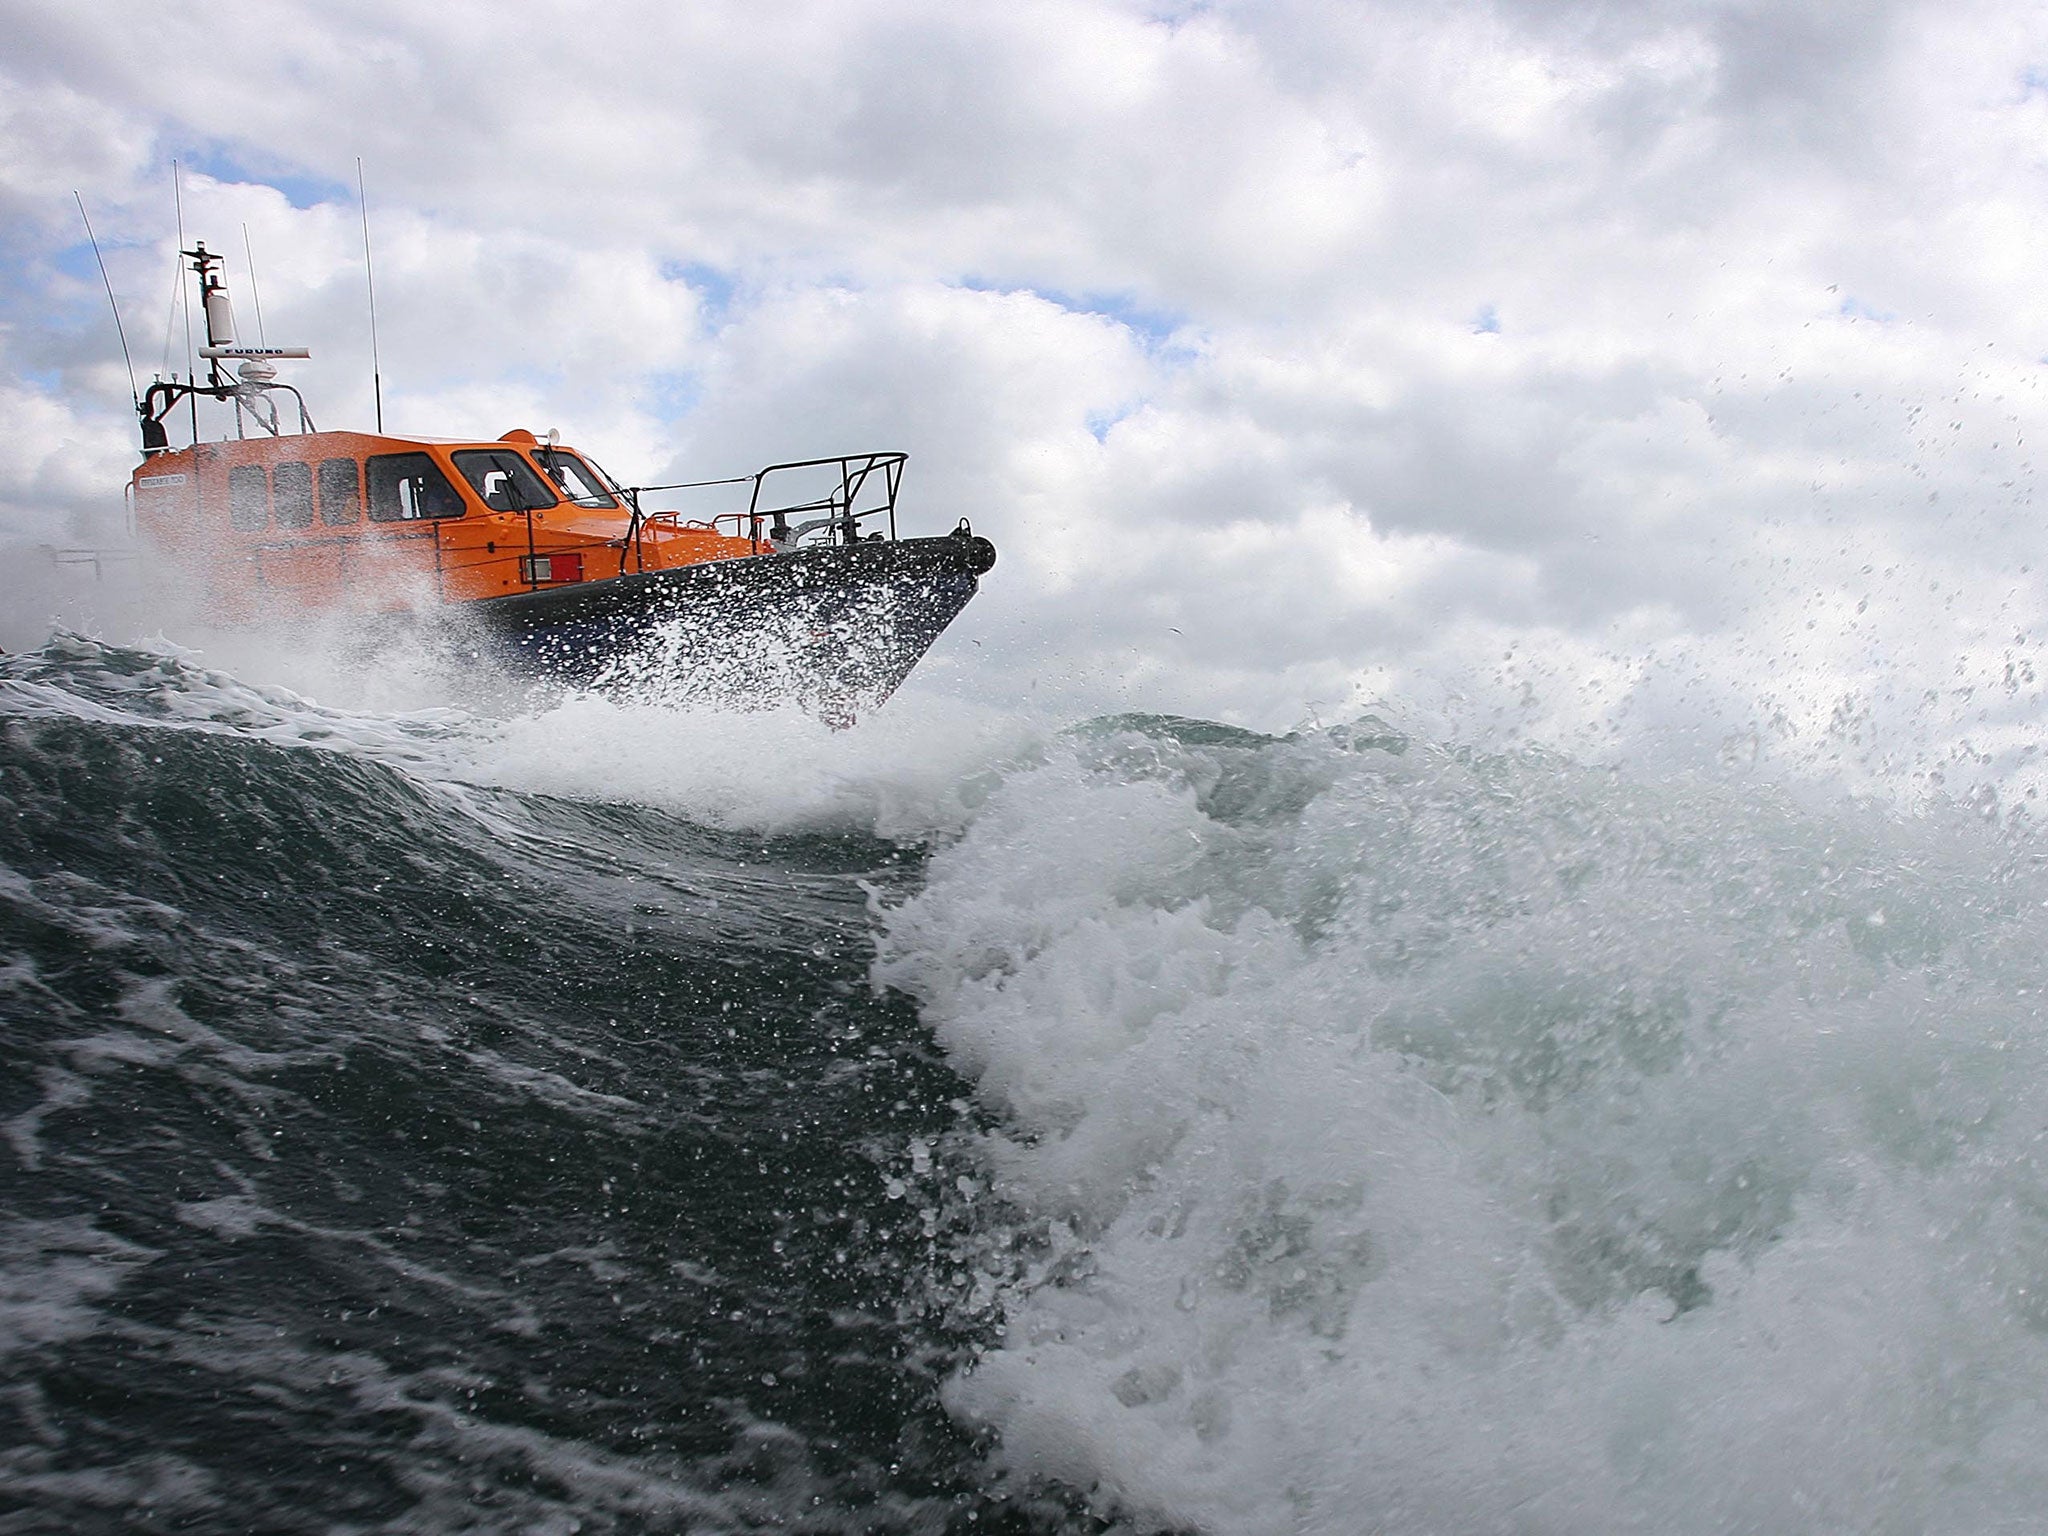 Three RNLI lifeboats and helicopter are searching the area